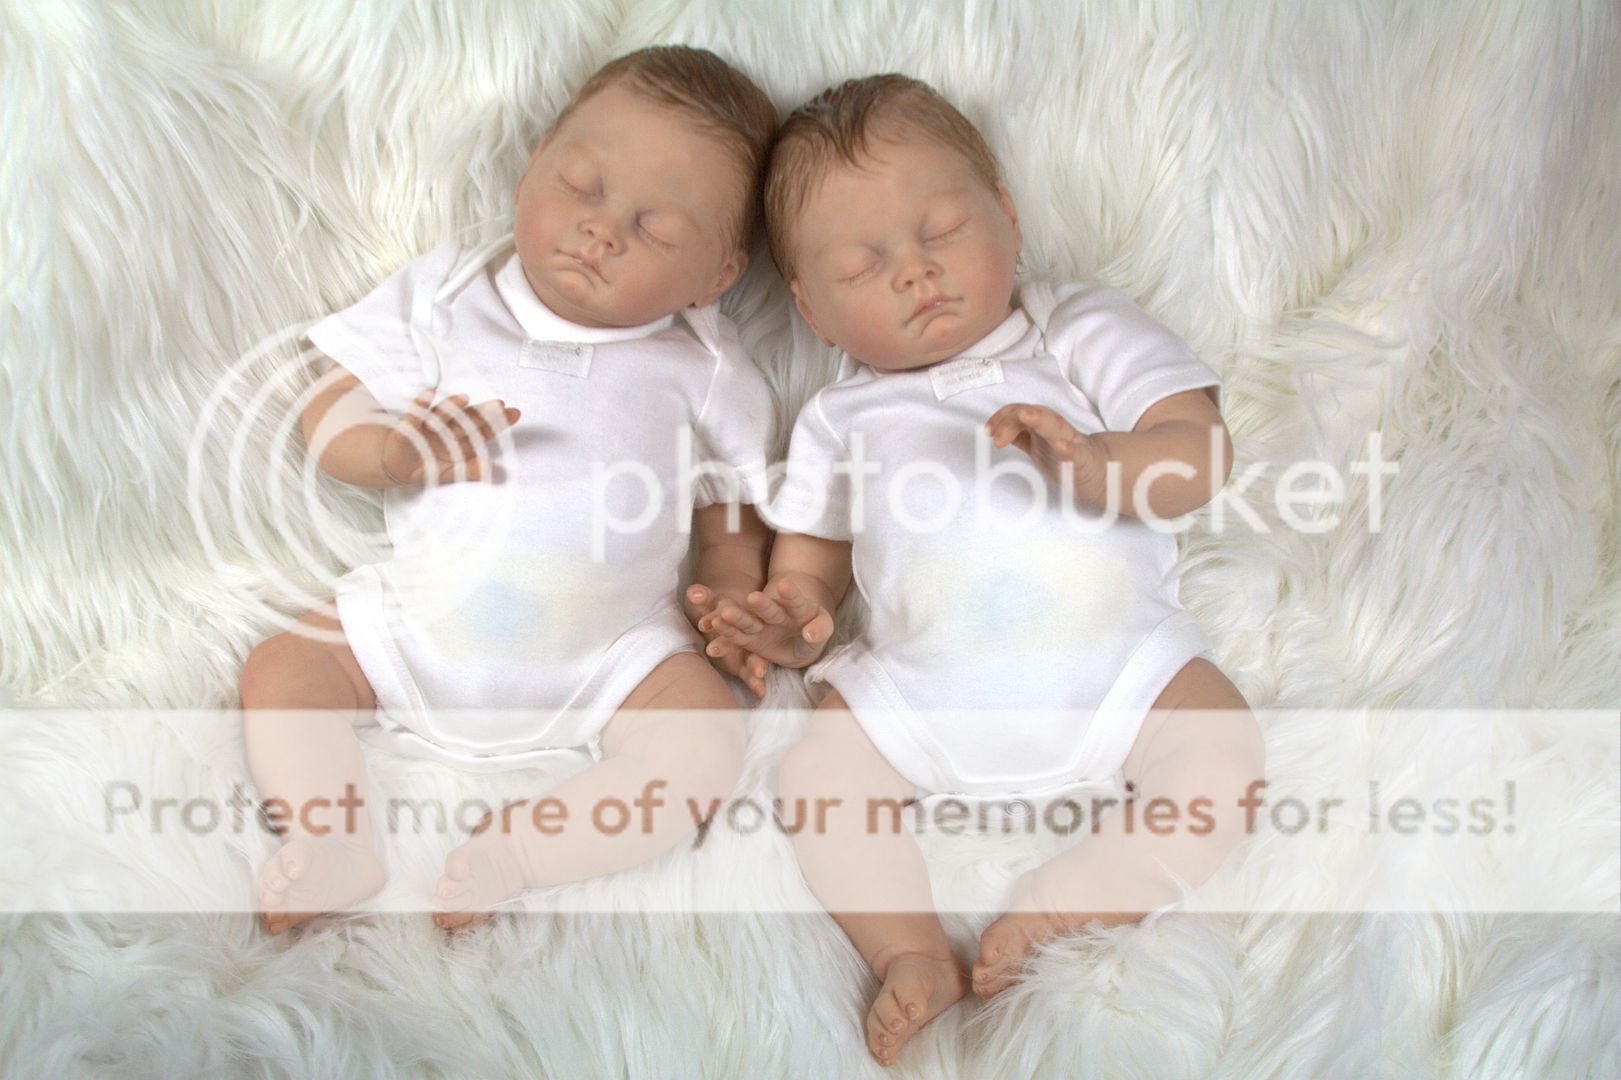 Reborn Baby Boy or Girl Twins You Decide 2 Babies for The Price of 1